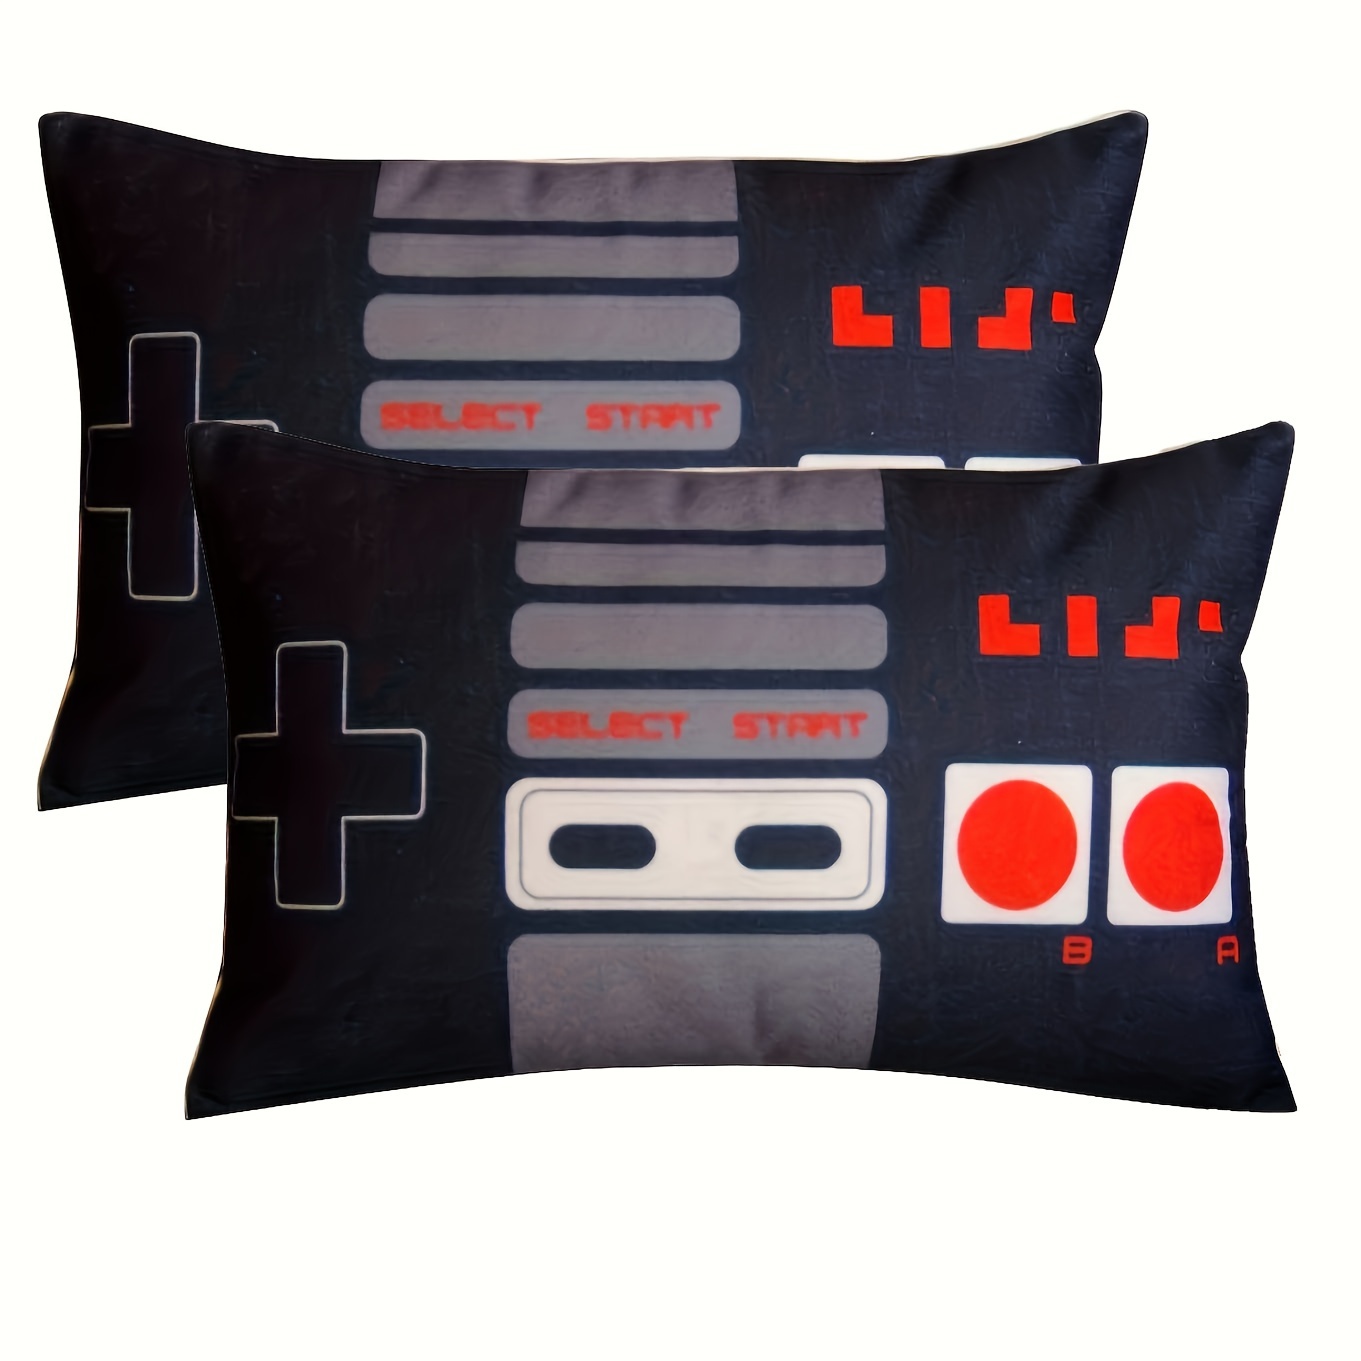 

2-piece Retro Gaming Controller Linen Pillow Covers 12x20" - Modern Style, Zip Closure, Machine Washable - Perfect For Sofa, Bedside, Car Decor - Unique Gamer Gift